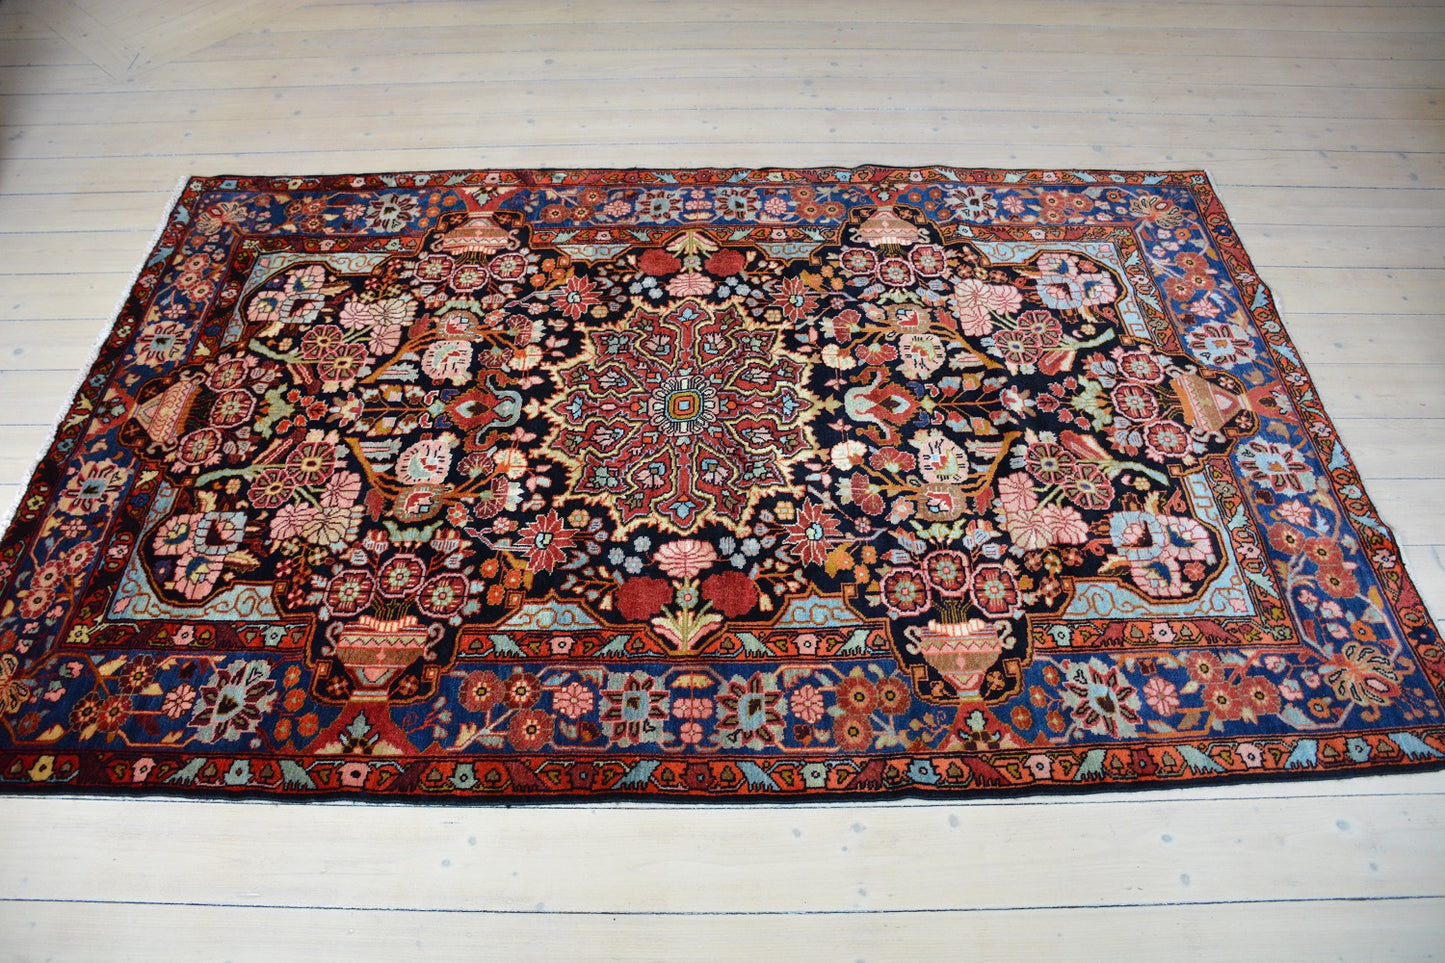 Semiantique Persian handknotted village rug from the Nahavand district. Size 128 x 224 cm.